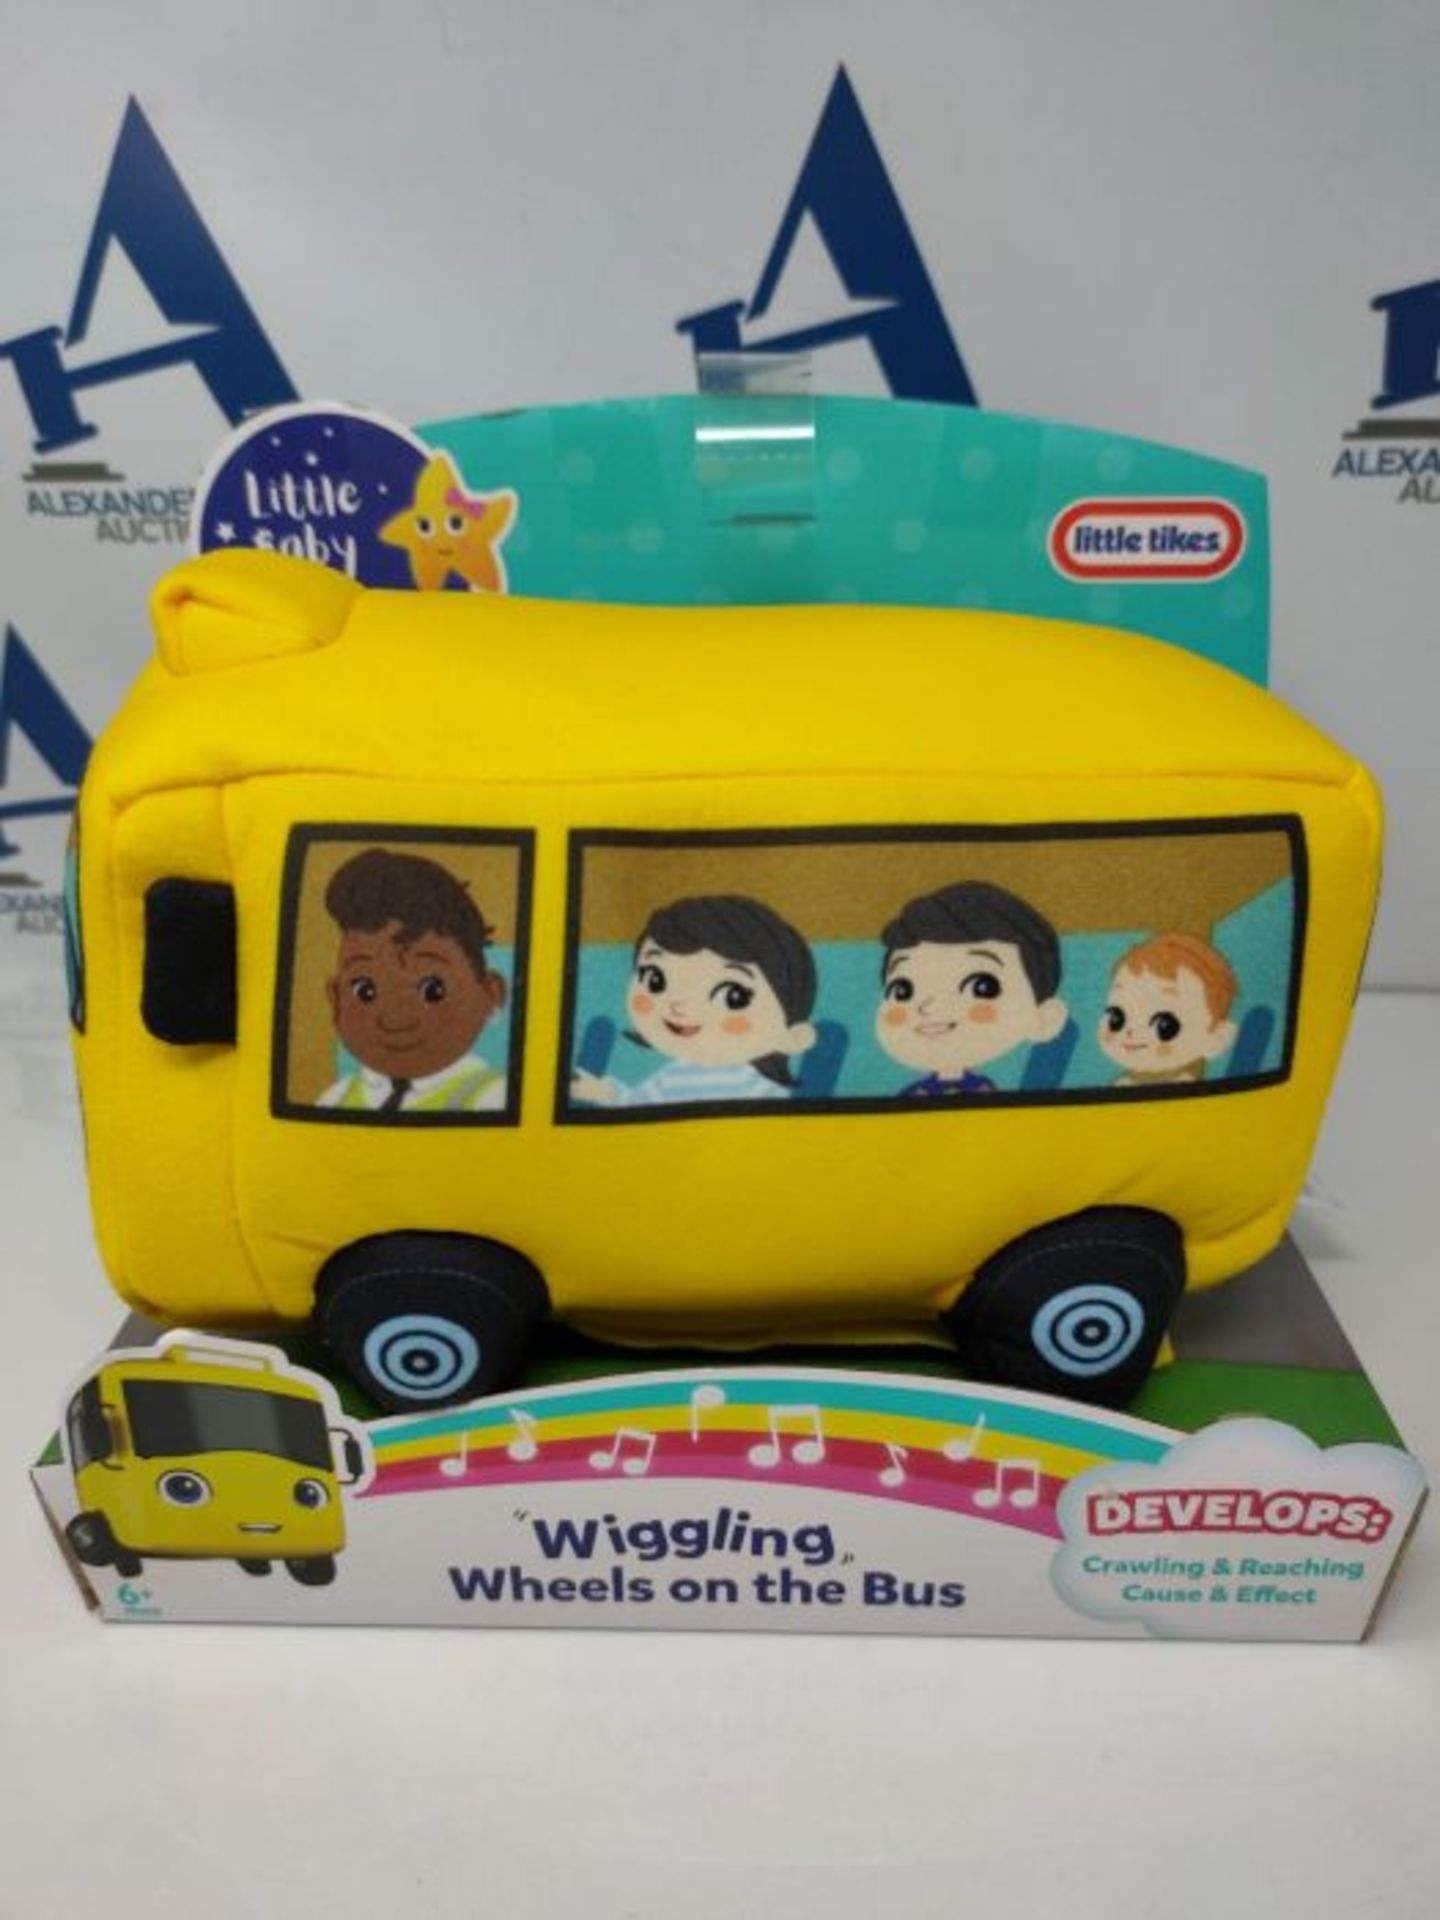 Little Baby Bum Wiggling Wheels on the Bus - Image 2 of 3